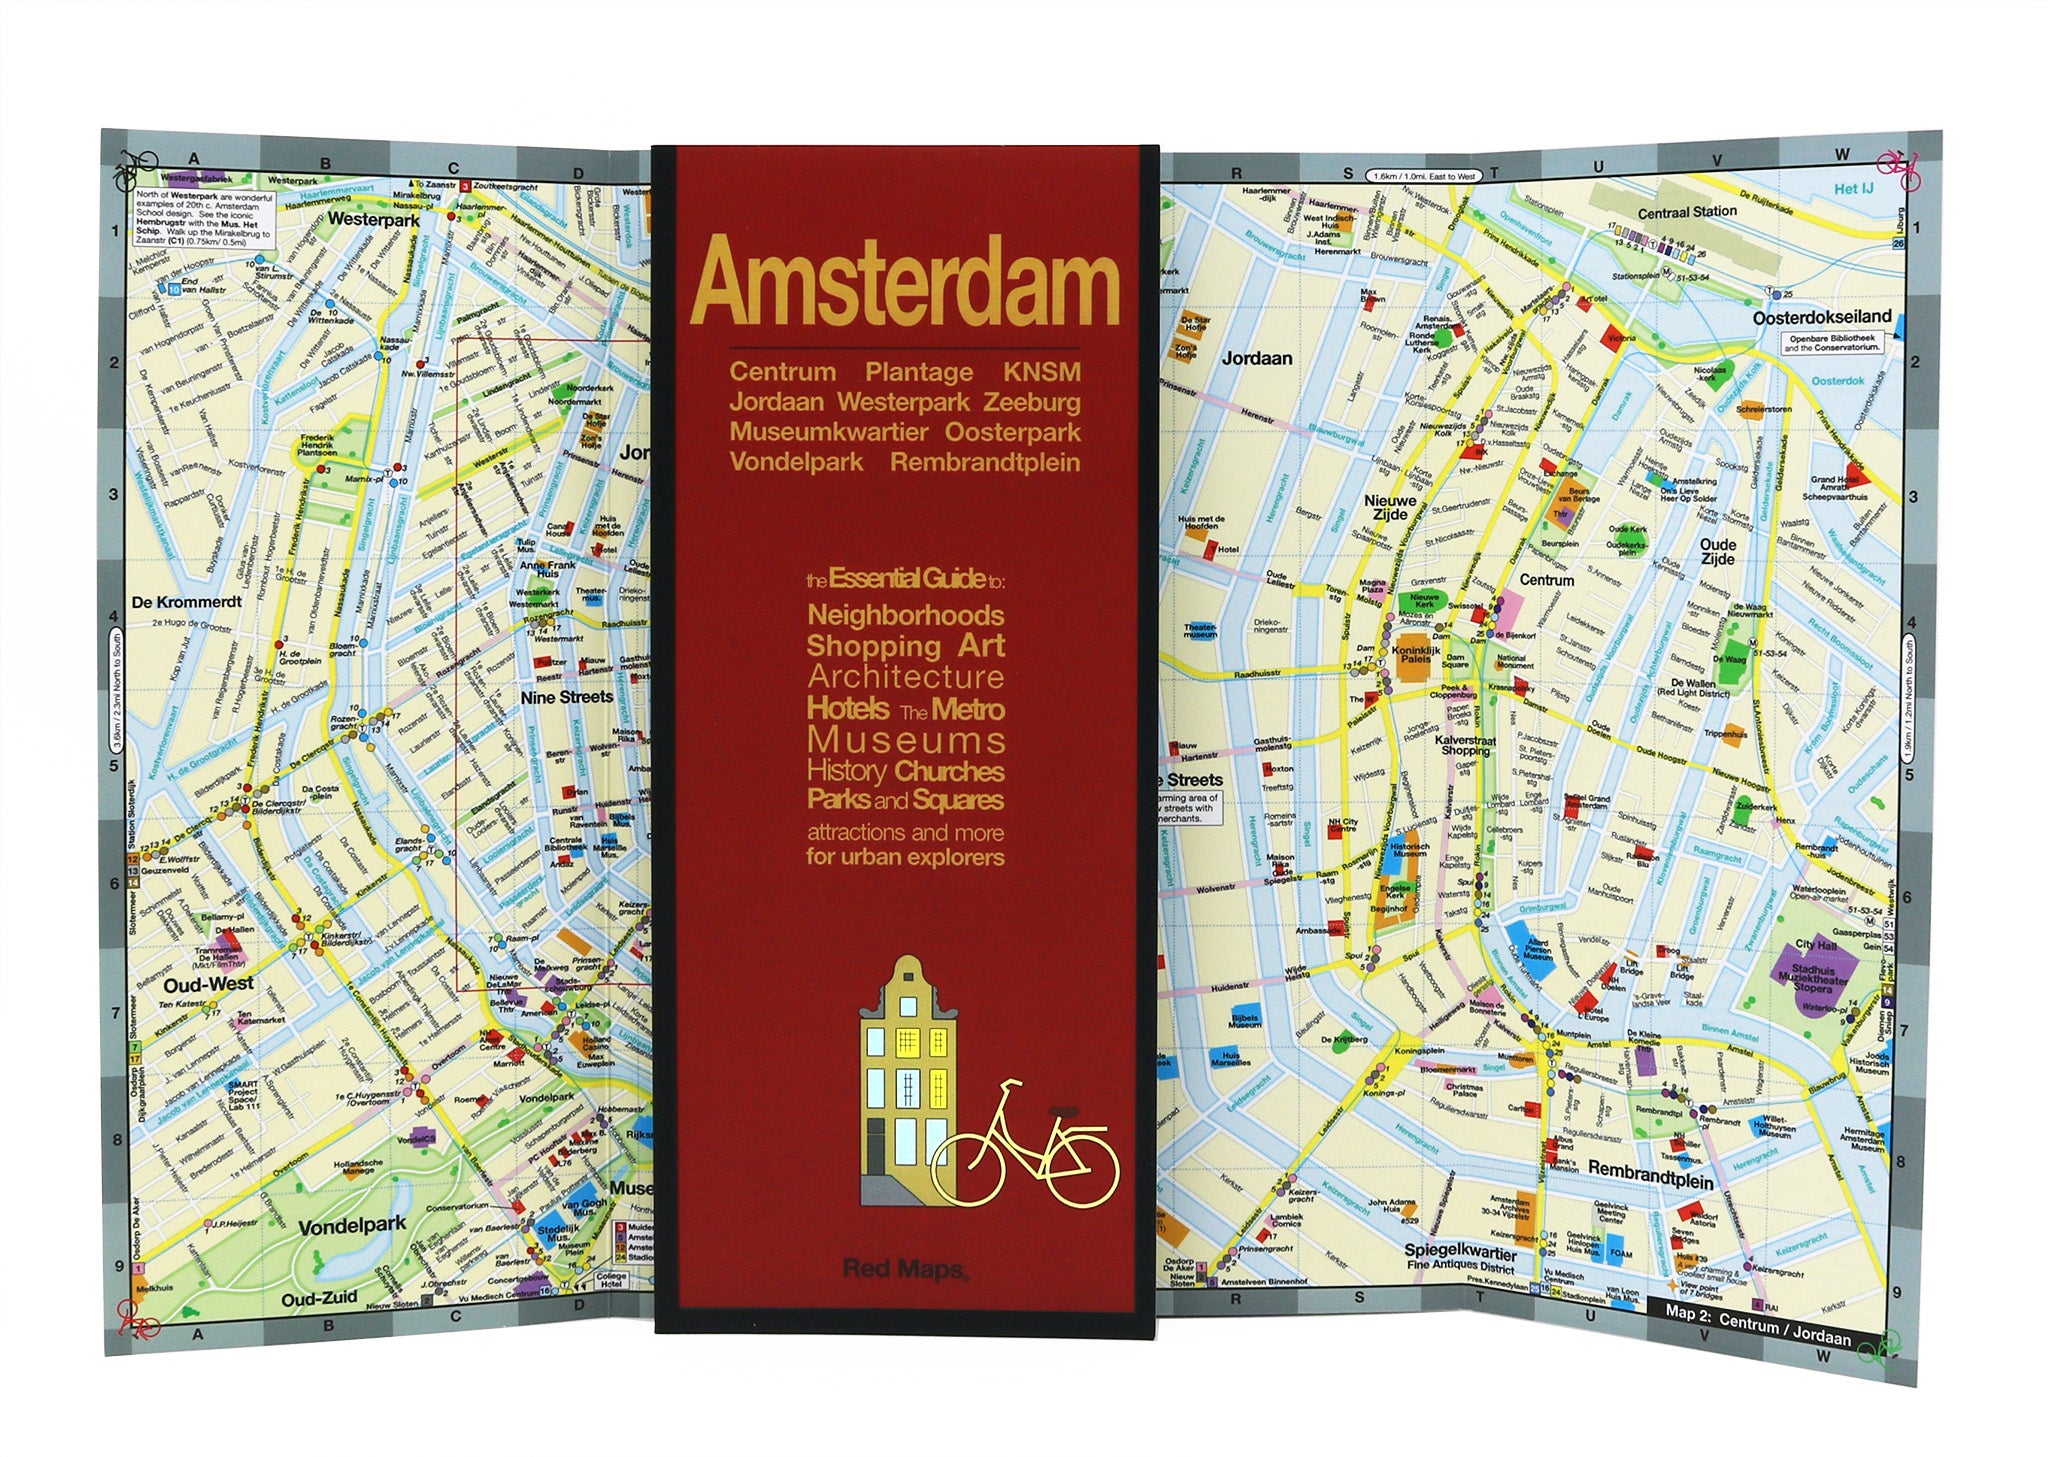 Map of Amsterdam showing popular attractions.